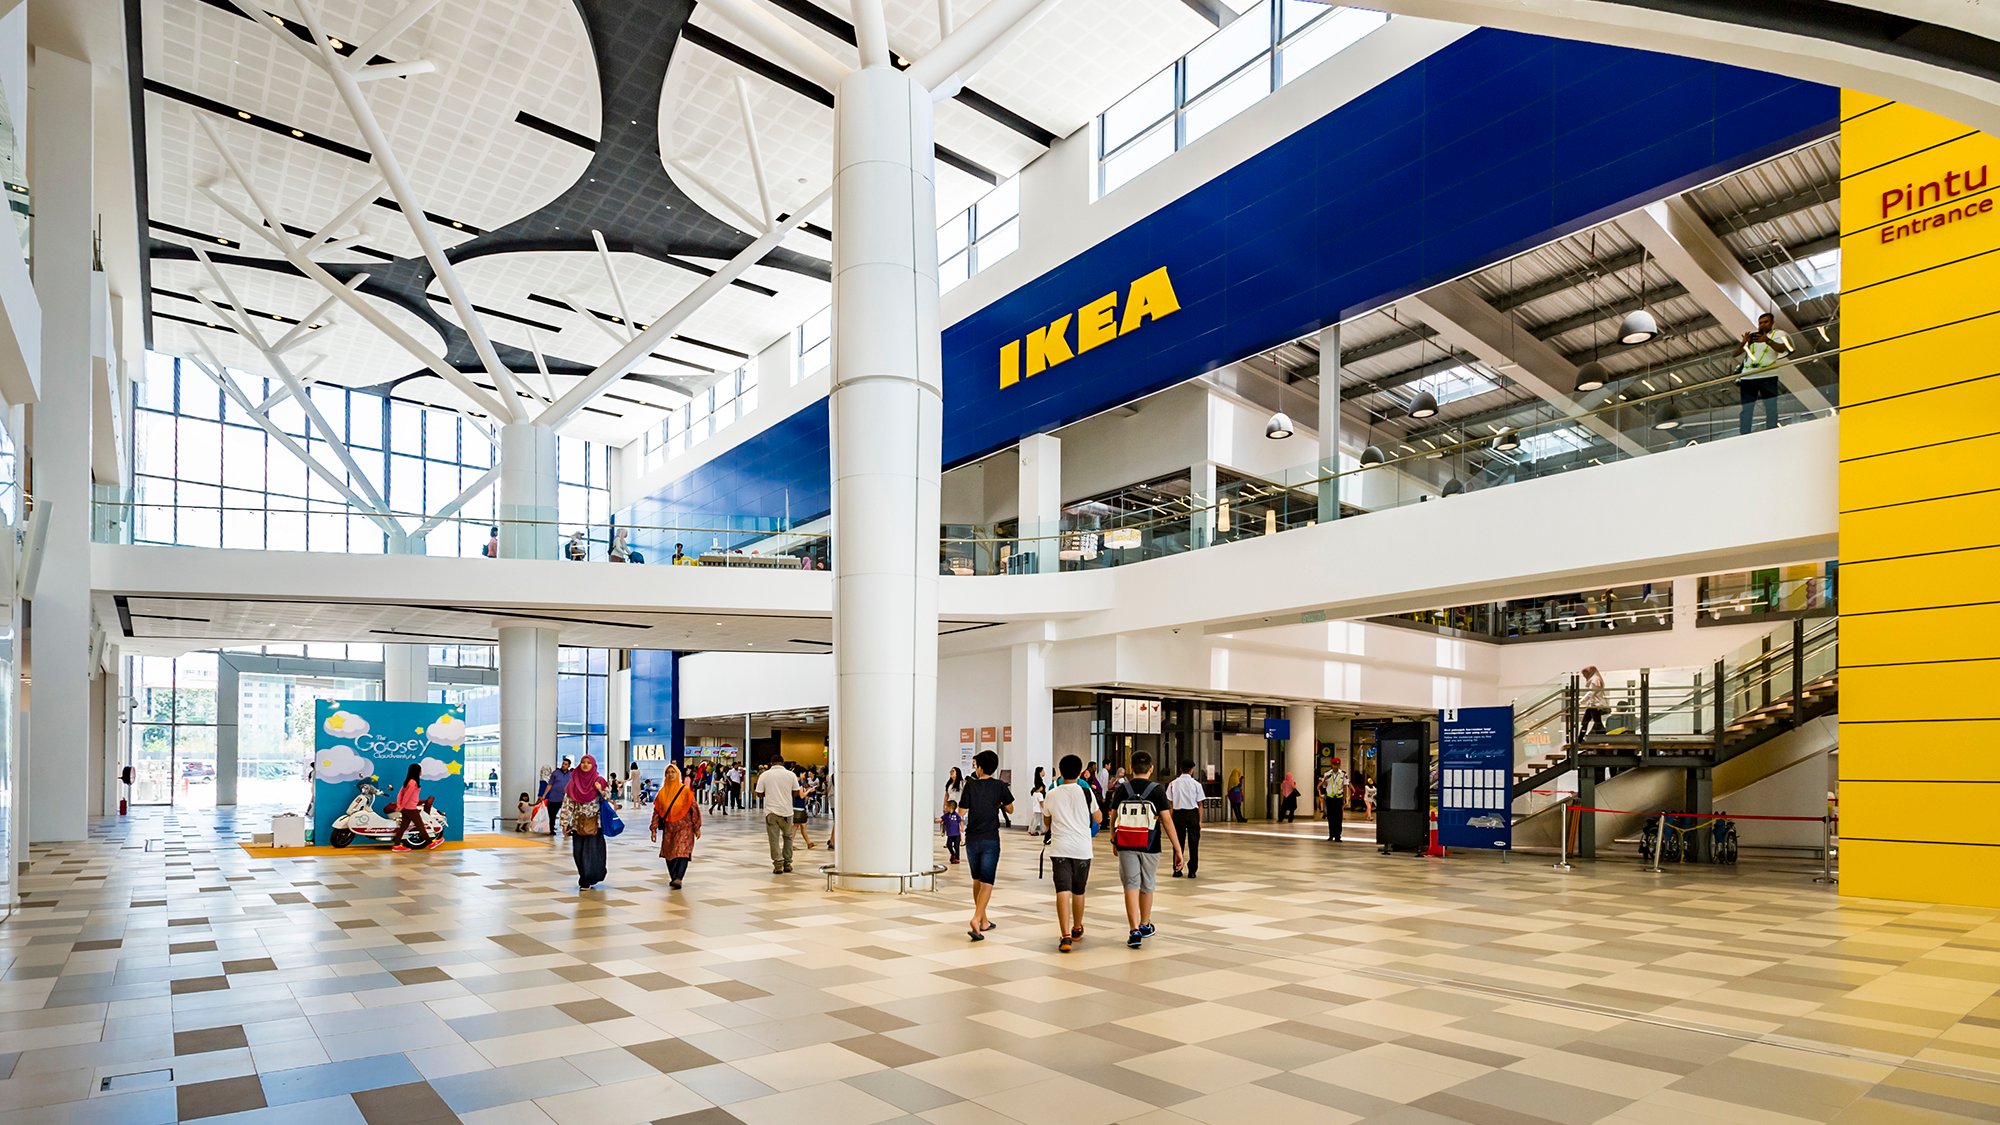 Inside the GBI Gold-rated IKEA store at Cheras